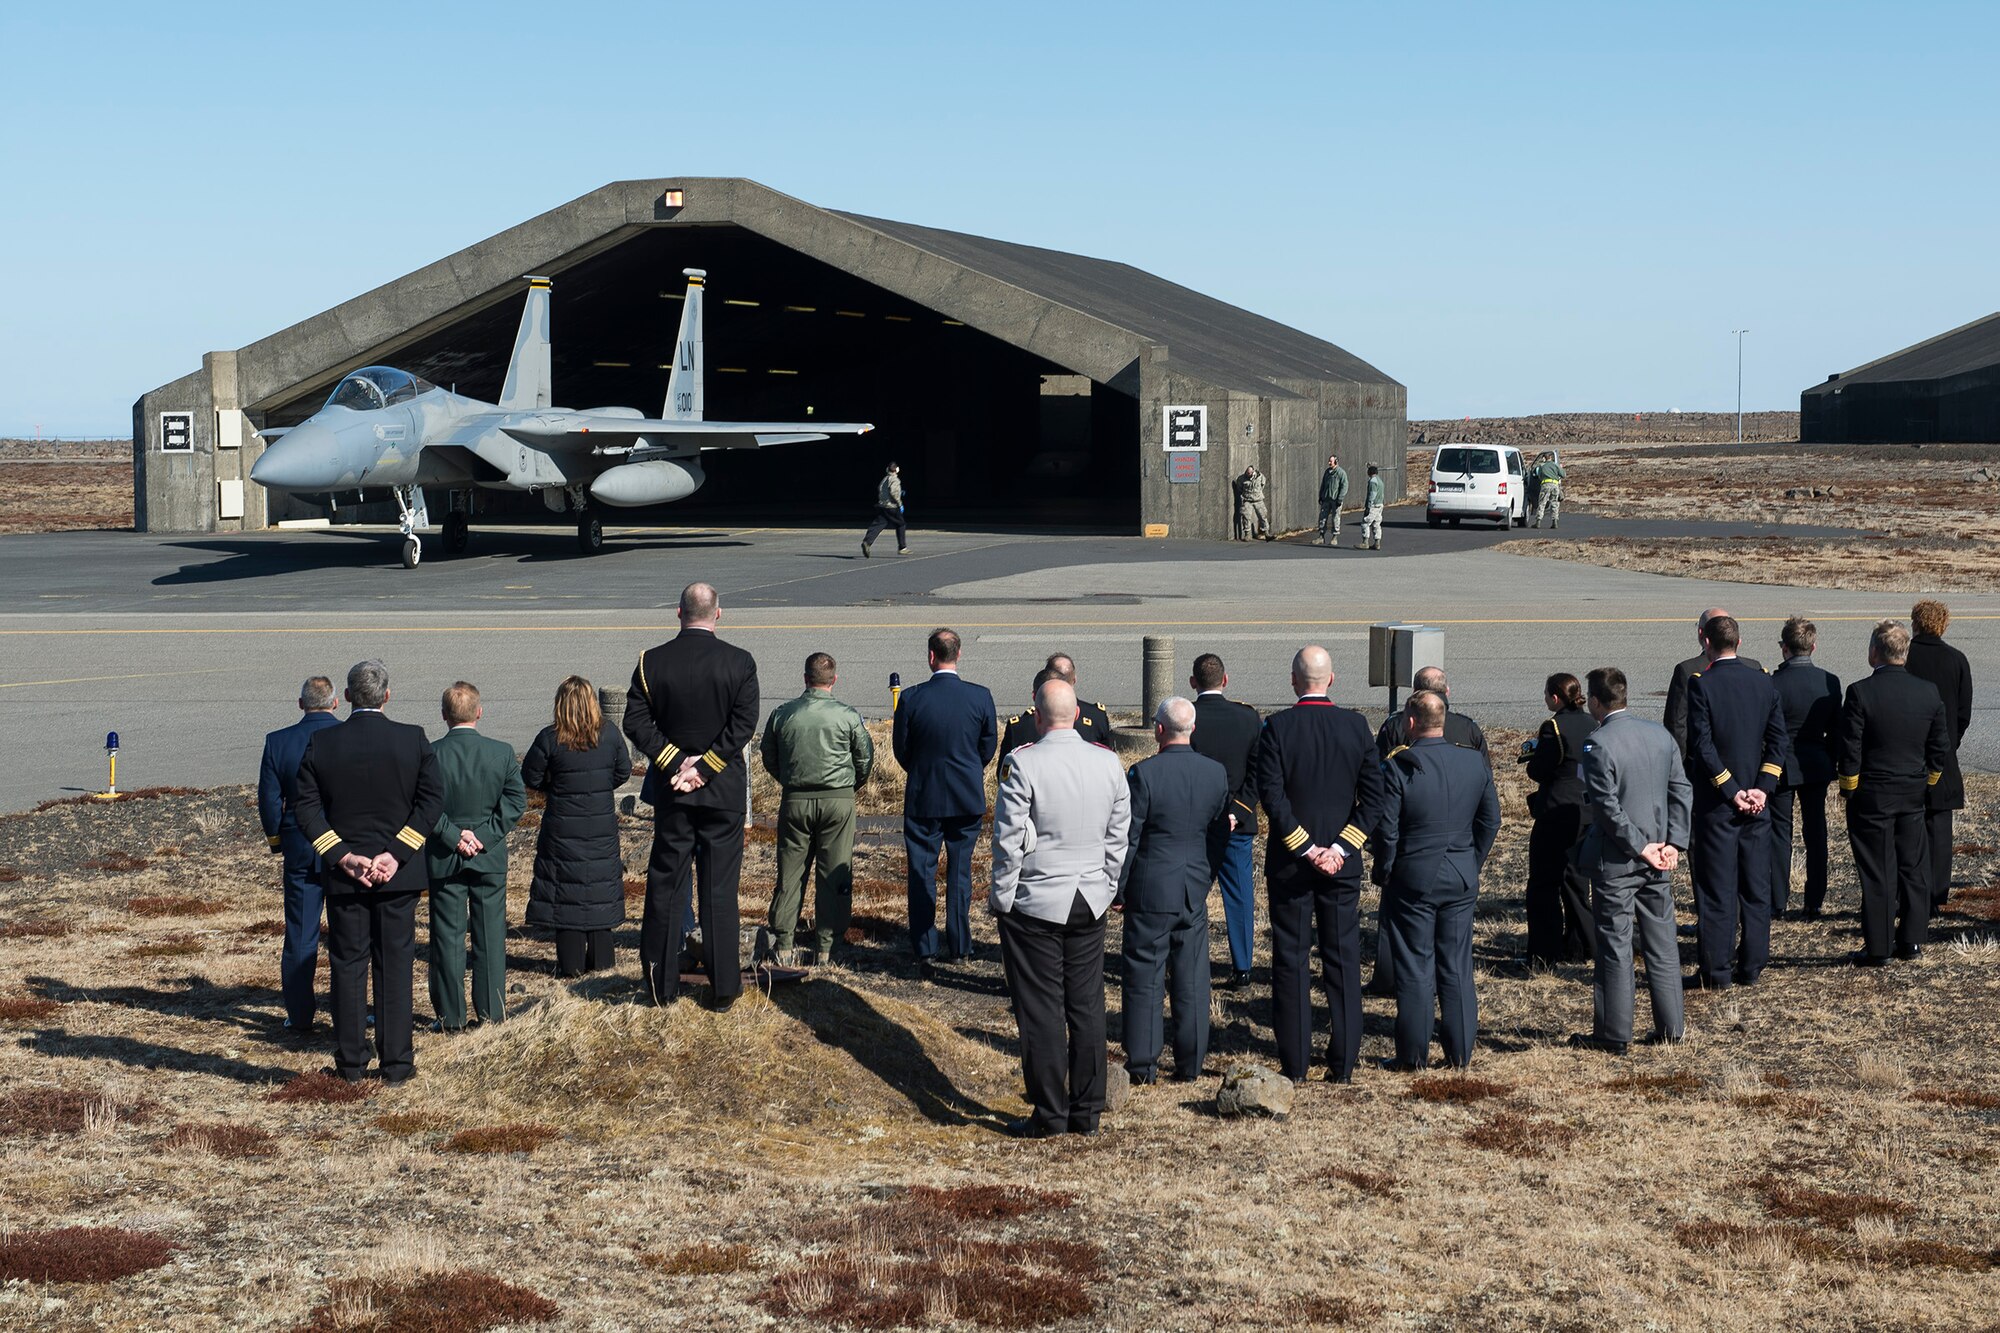 Members of the annual Arctic Security Forces Roundtable watch a training scramble of an F-15C Eagle fighter aircraft at Keflavik International Airport, Iceland. Representatives from 11 nations across Europe and North America met for the ASFR in order to promote regional understanding and enhance multilateral security operations within the Arctic area. (U.S. Air Force photo/Staff Sgt. Chad Warren)